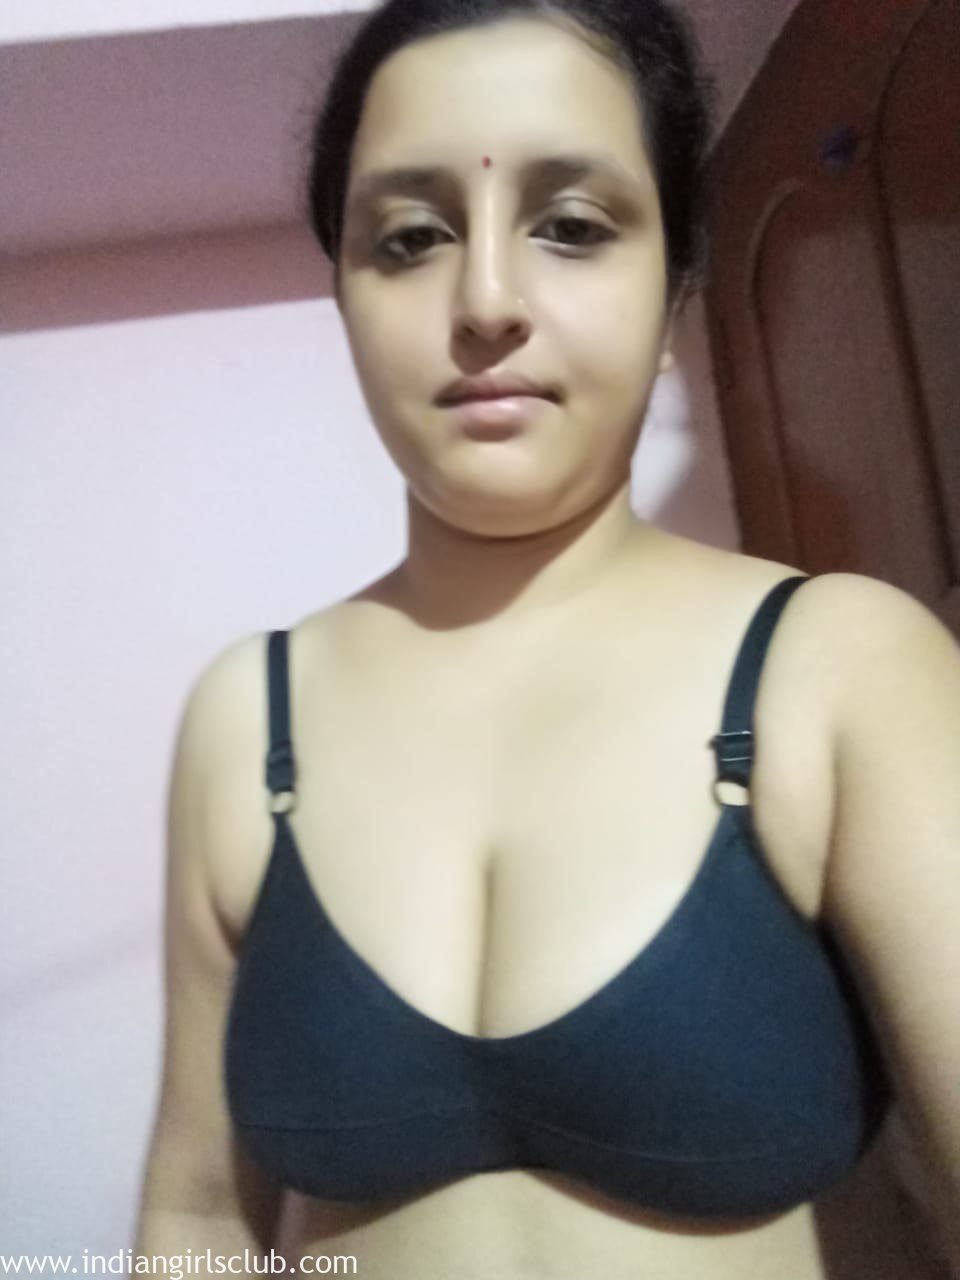 big-tits-bengali-indian-housewife-ready-for-hot-sex-12 - Indian Girls Club  photo